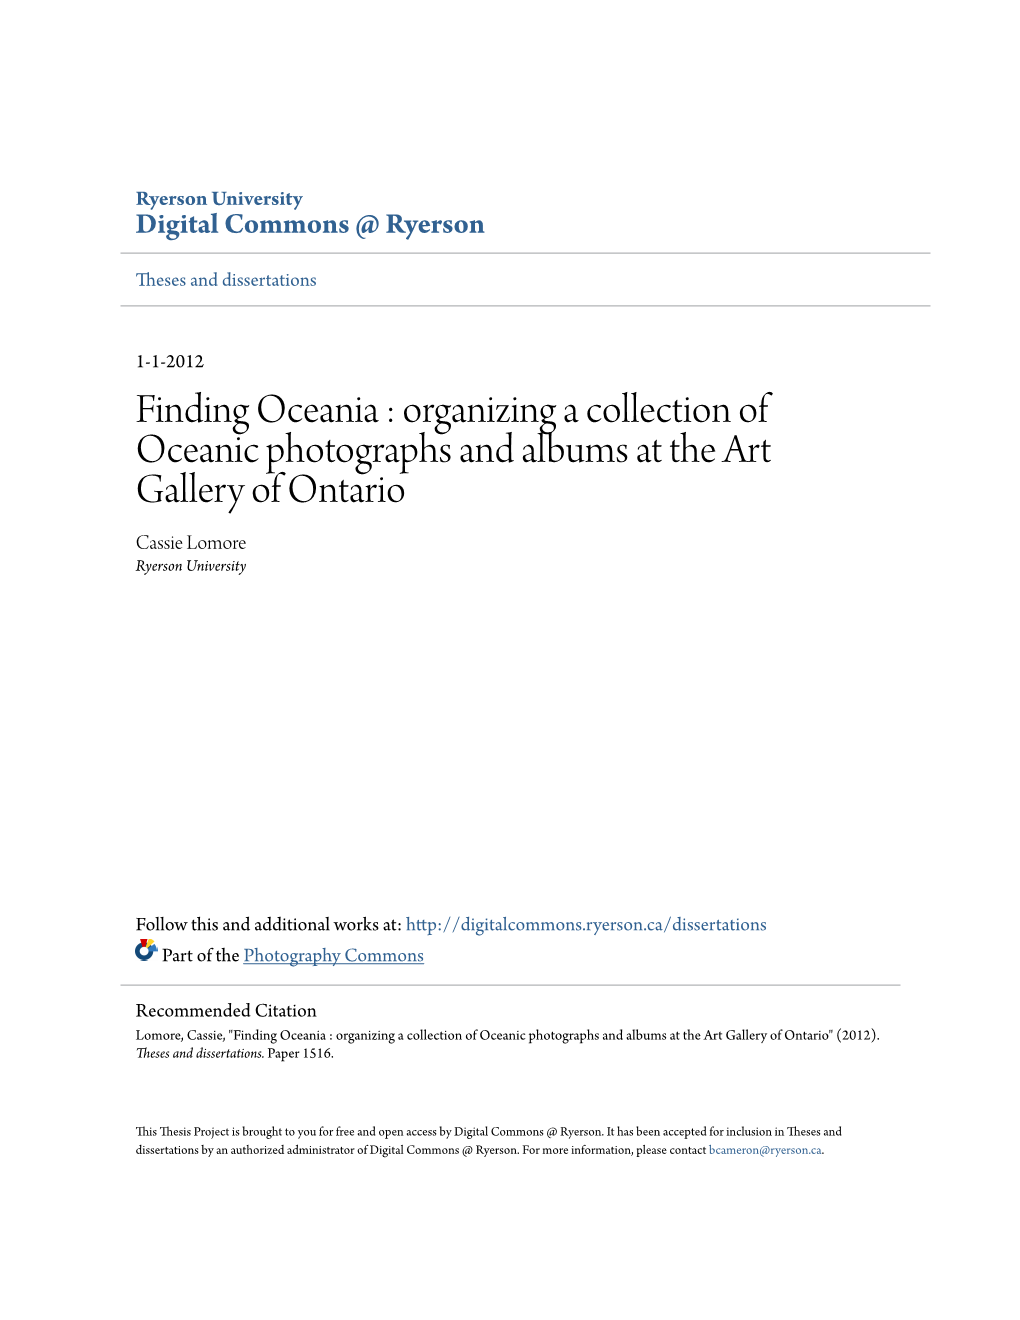 Organizing a Collection of Oceanic Photographs and Albums at the Art Gallery of Ontario Cassie Lomore Ryerson University